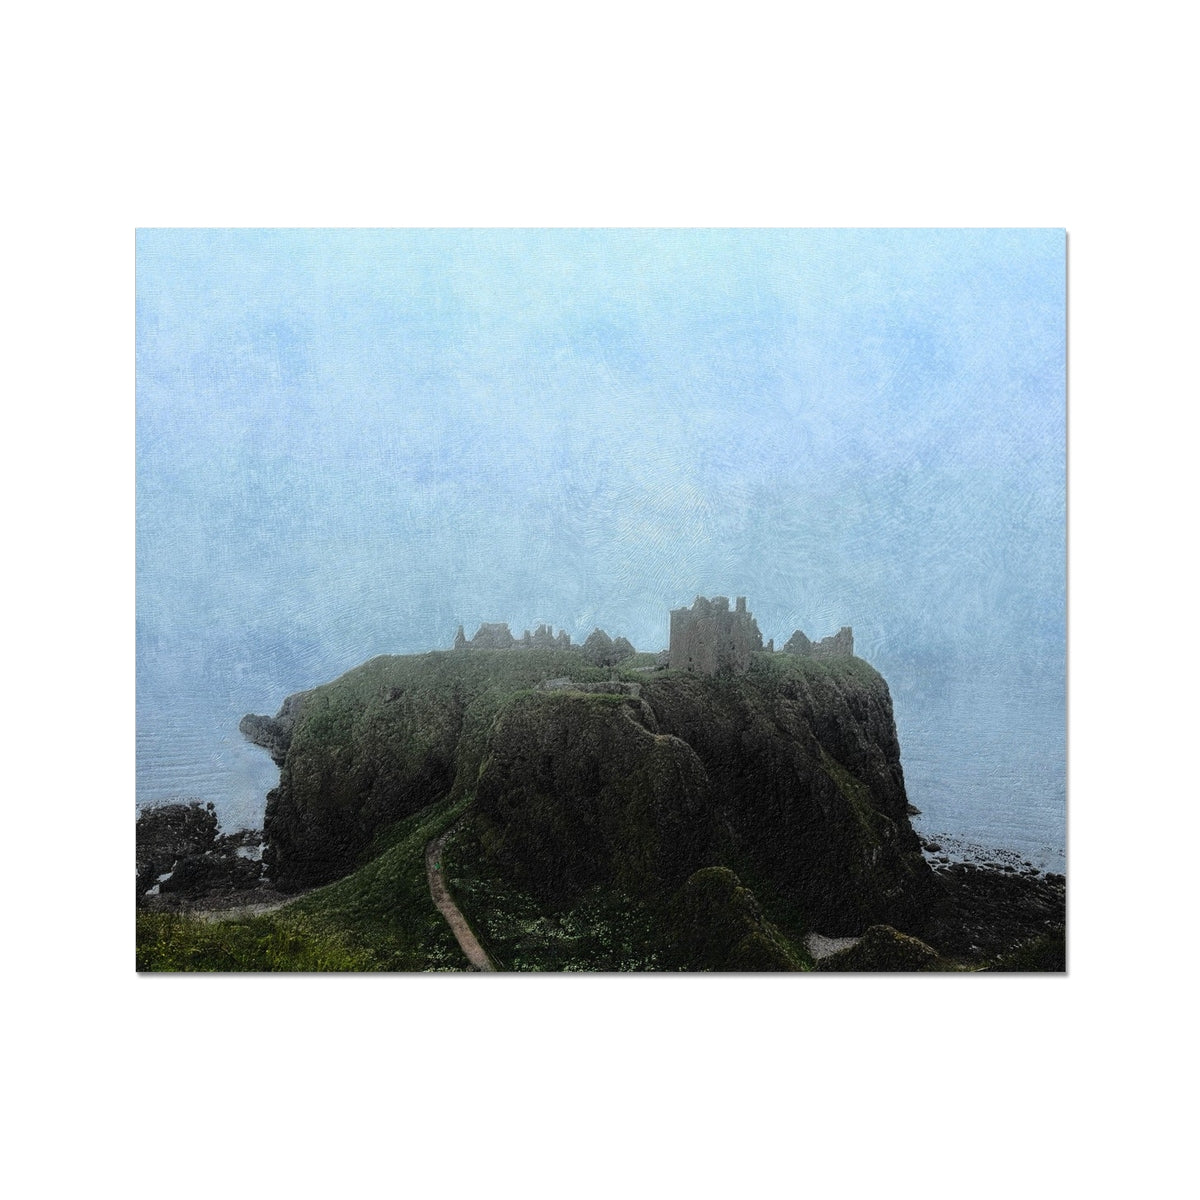 Dunnottar Castle Mist Painting | Artist Proof Collector Prints From Scotland-Artist Proof Collector Prints-Historic & Iconic Scotland Art Gallery-20"x16"-Paintings, Prints, Homeware, Art Gifts From Scotland By Scottish Artist Kevin Hunter